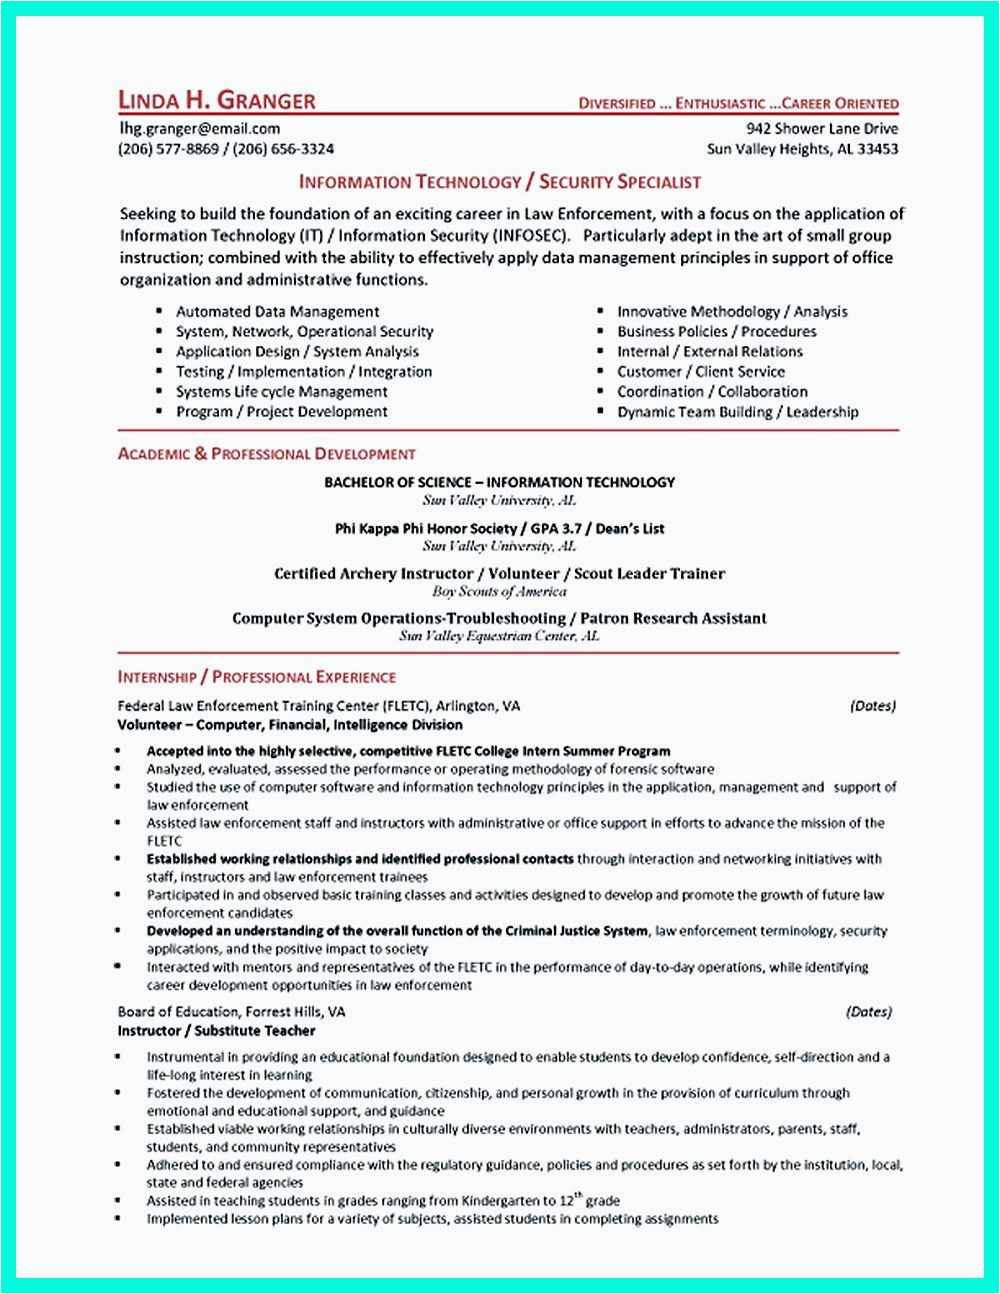 Sample Resume for Entry Level Cyber Security Cyber Security Resume Must Be Well Created to the Job